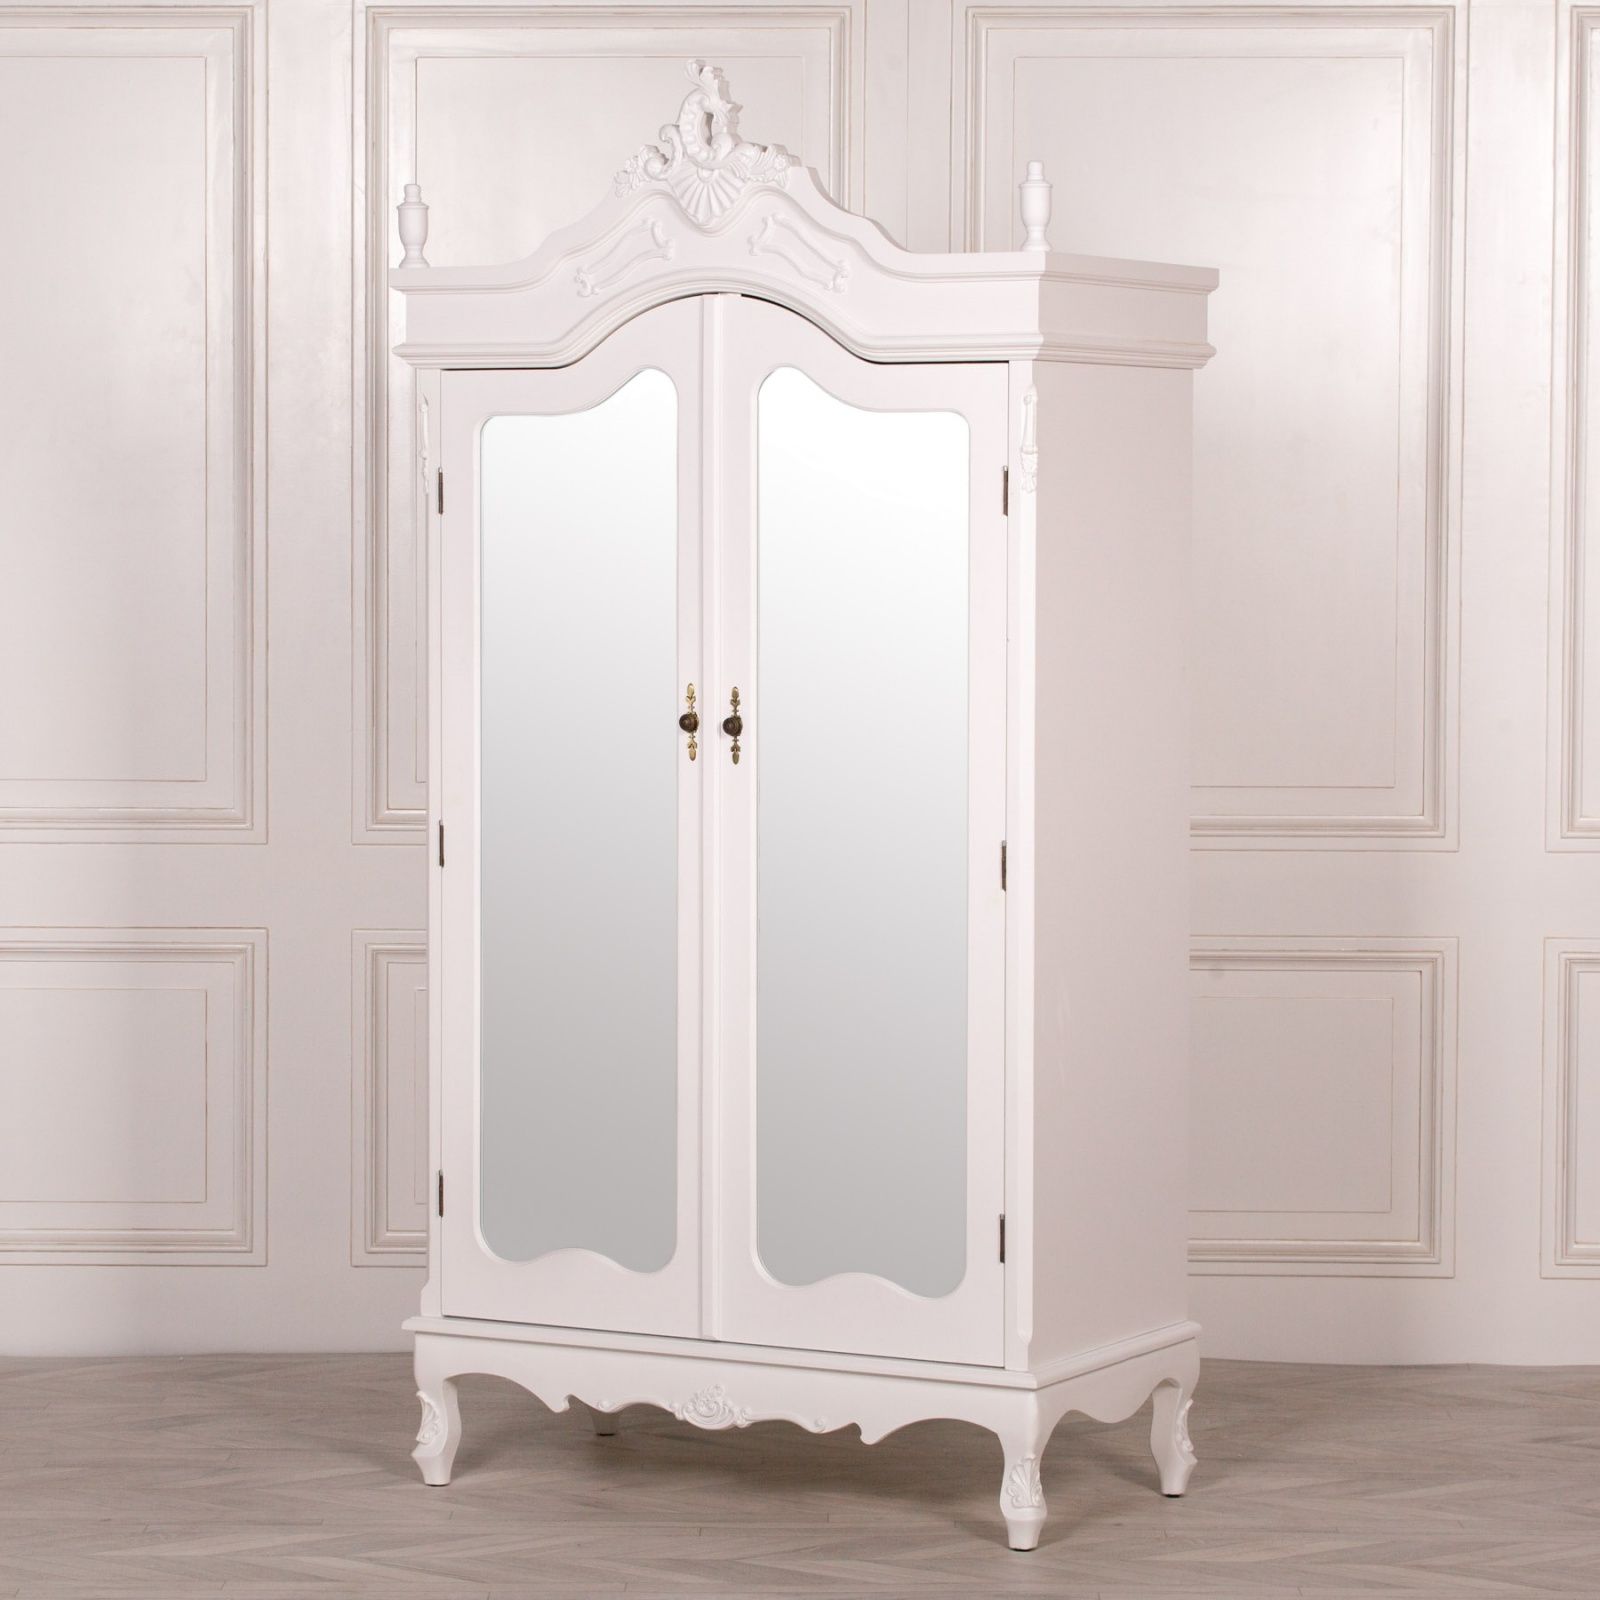 French Style Wardrobe White Mirrored Double Armoire Intended For French Wardrobes For Sale (View 4 of 20)